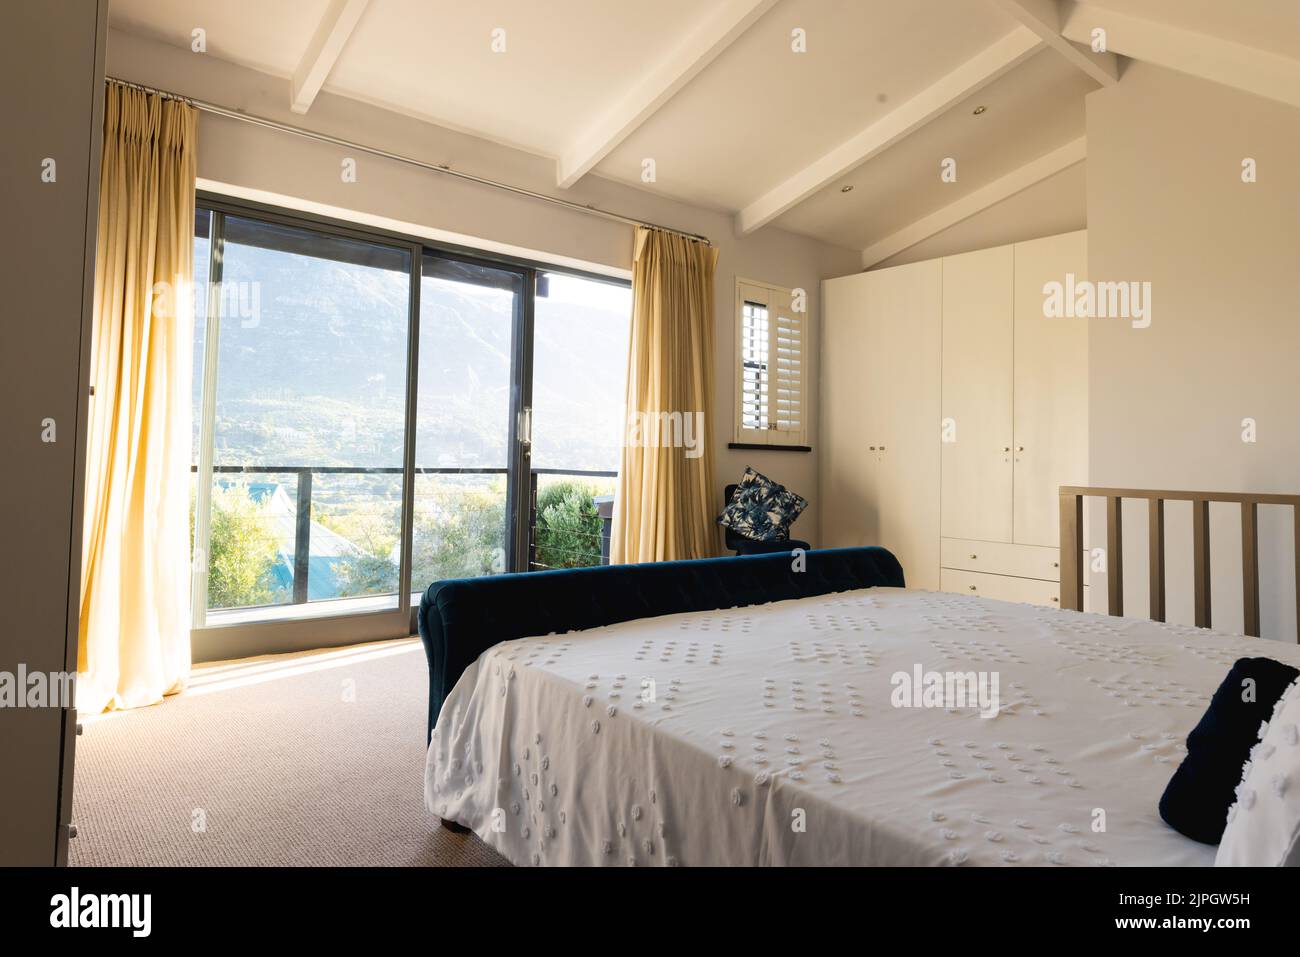 General view of luxury interior of bedroom with bed and wardrobe Stock Photo